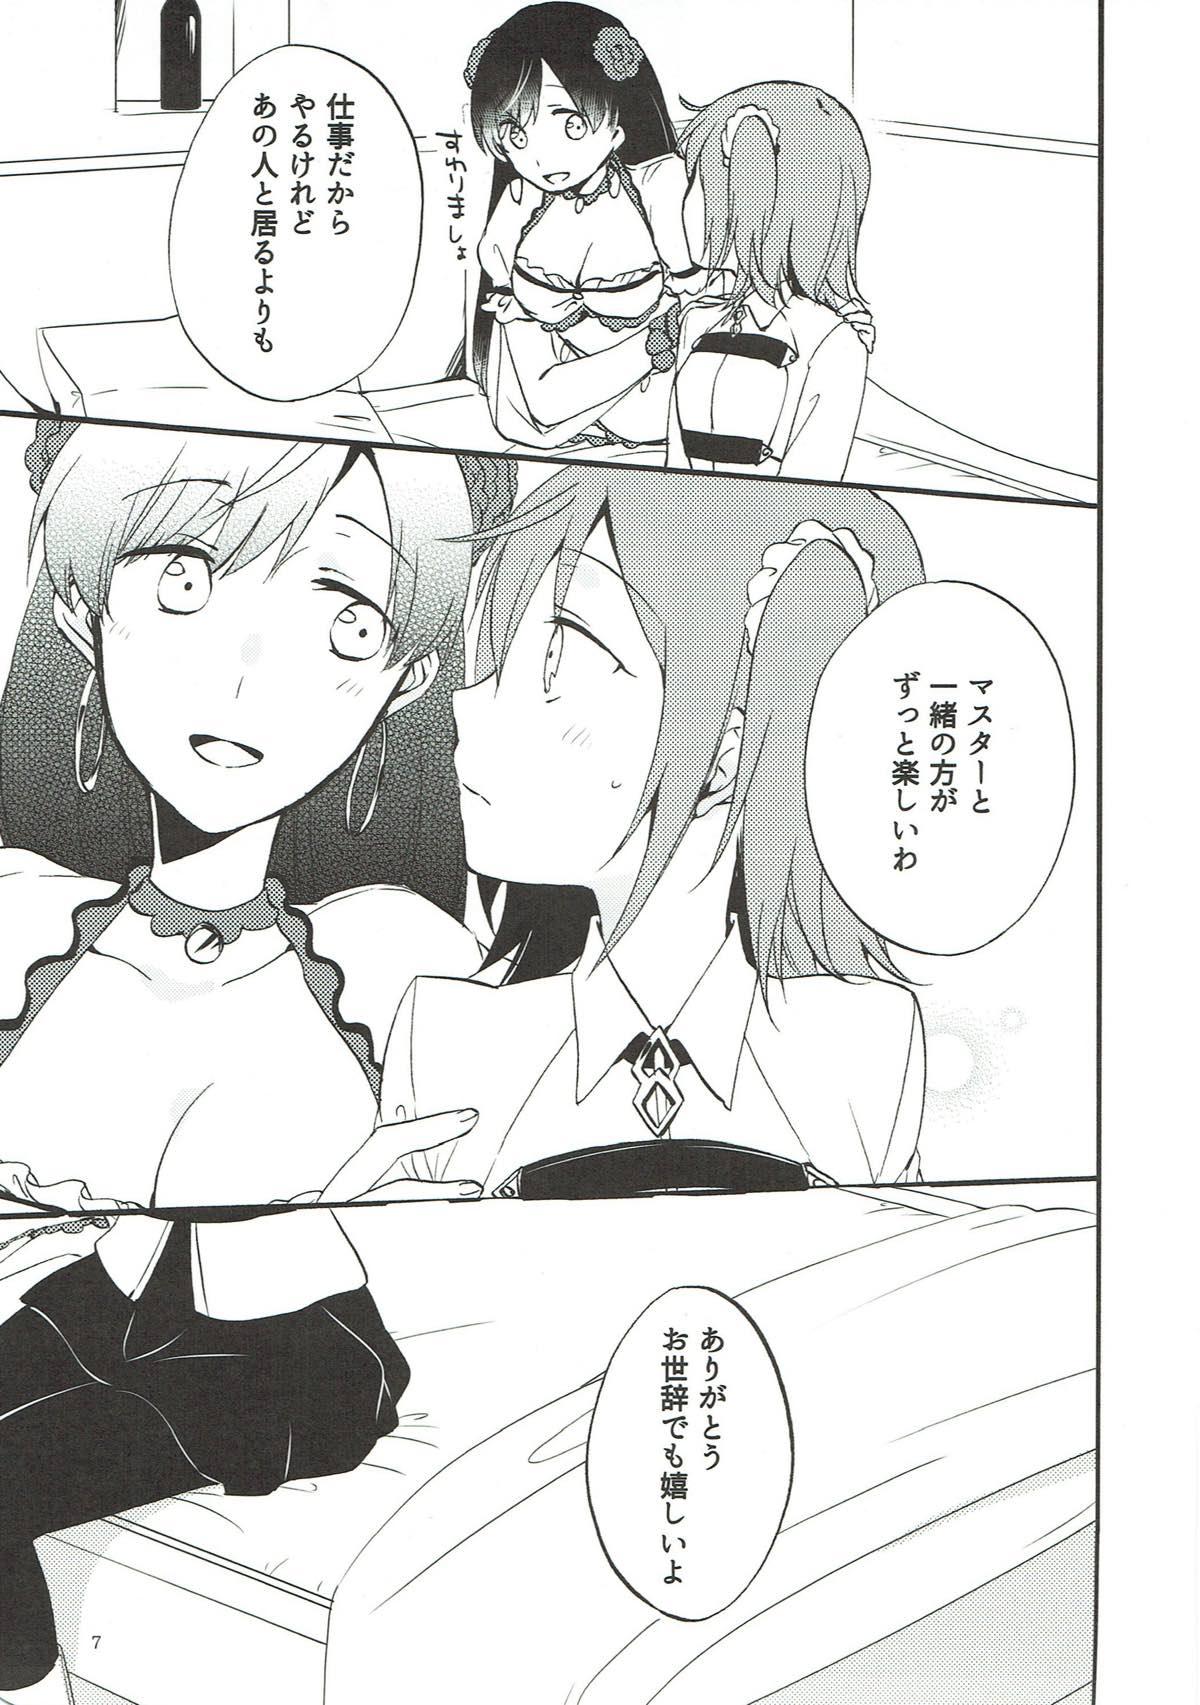 Pounded MEMORIAL MG - Fate grand order Masturbandose - Page 6